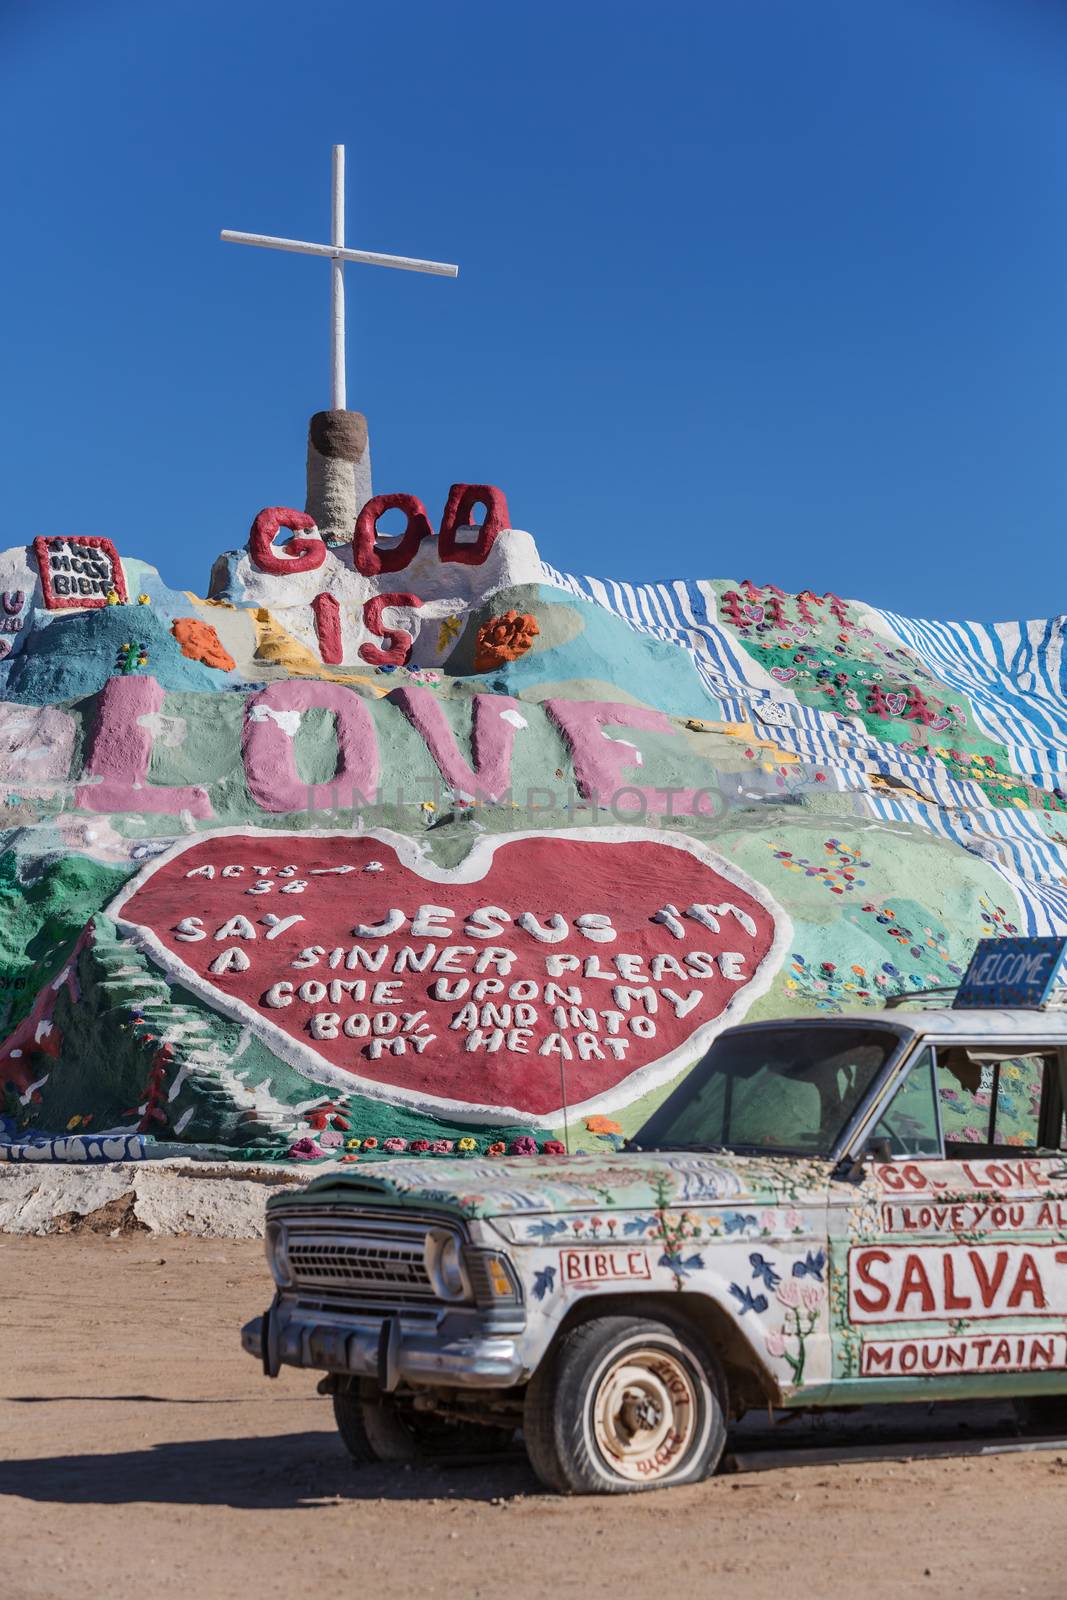 Salvation Mountain and Art Car by Creatista